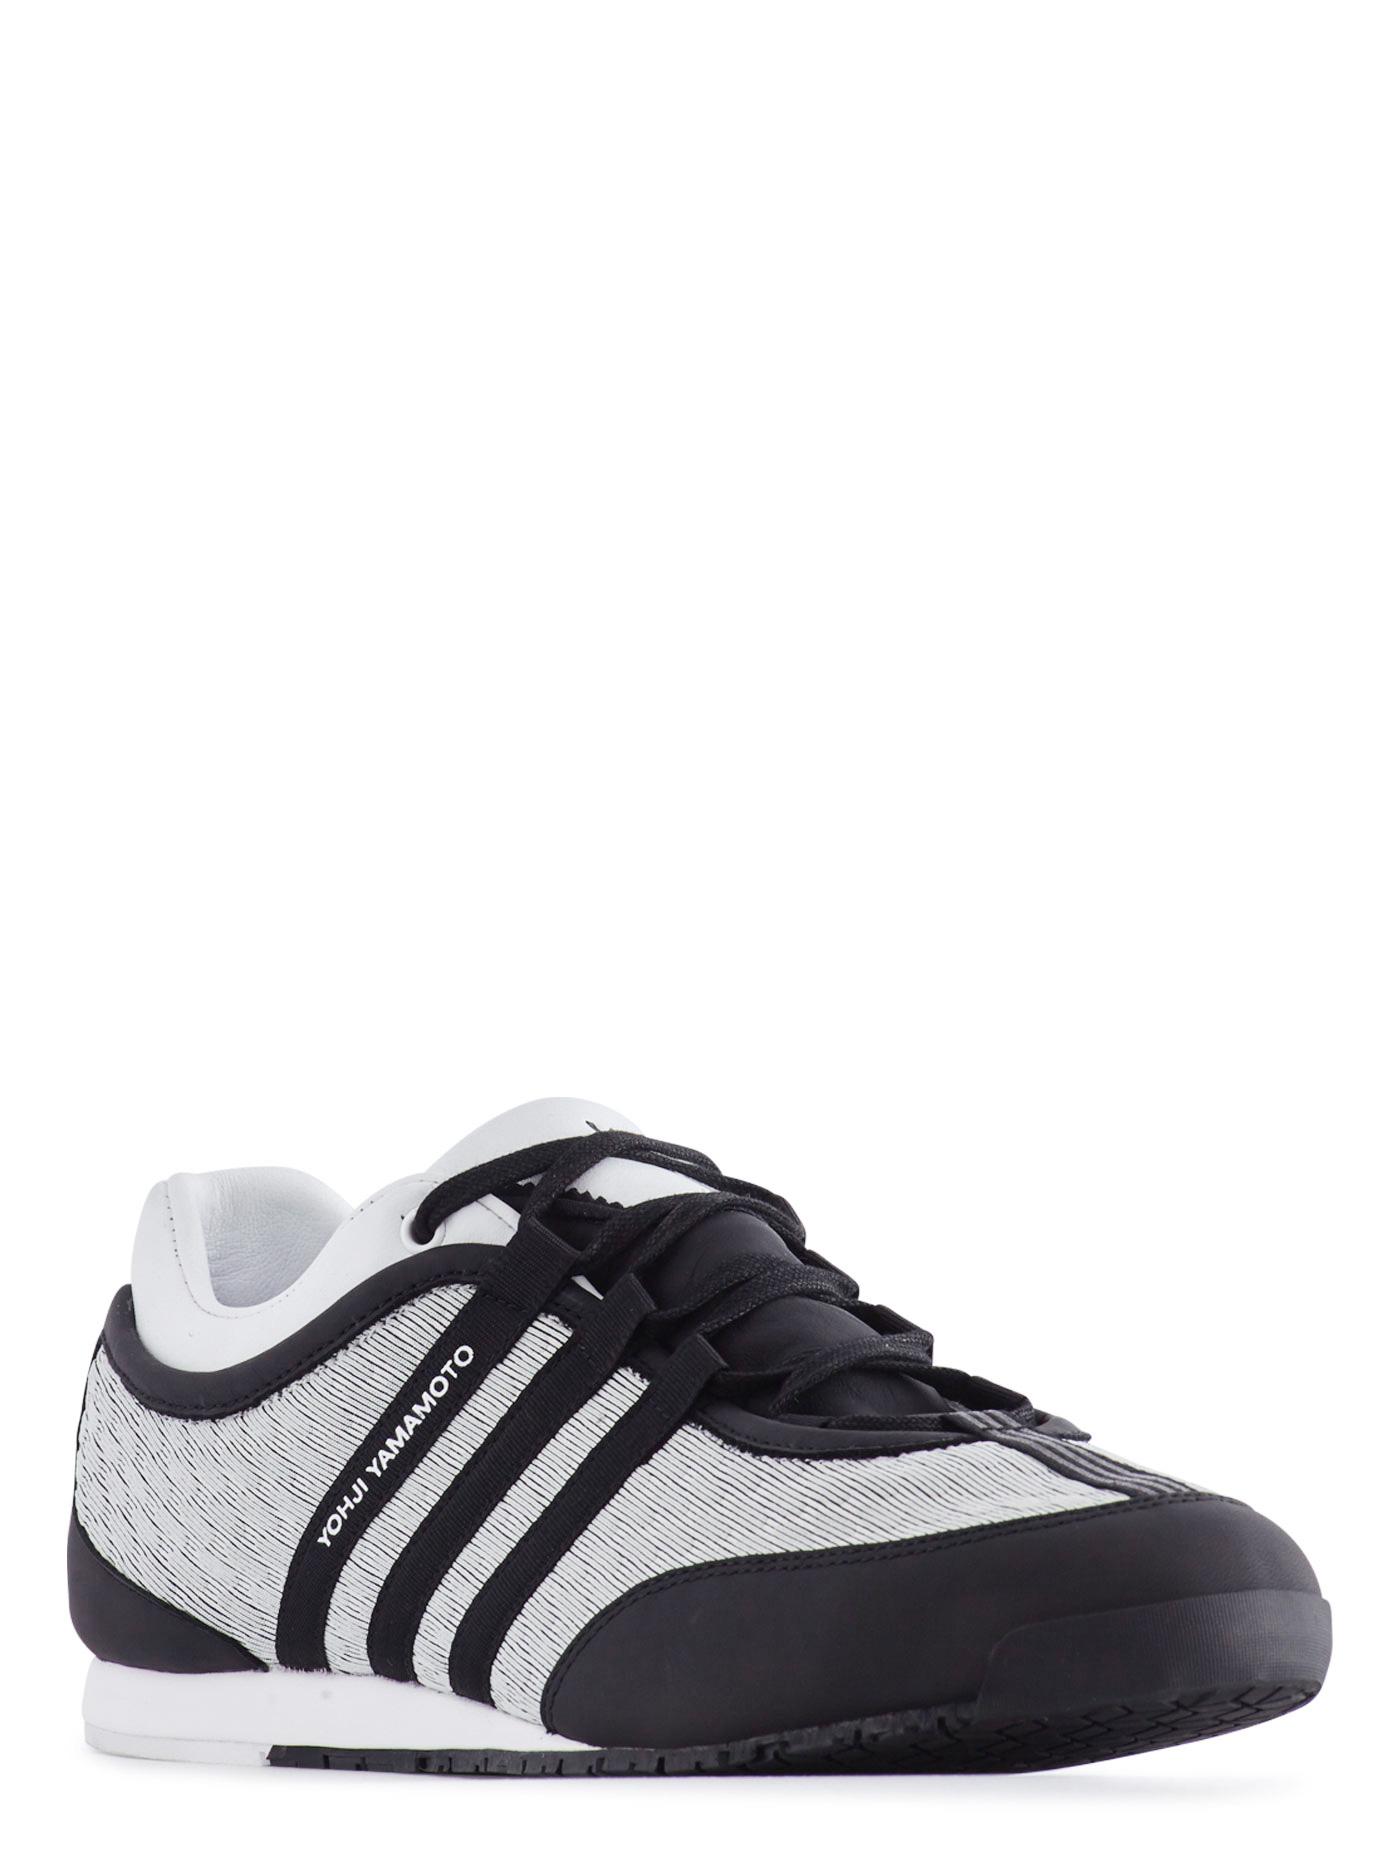 Y-3 Leather Y3 Boxing Sneakers in Black White (Black) for Men - Lyst